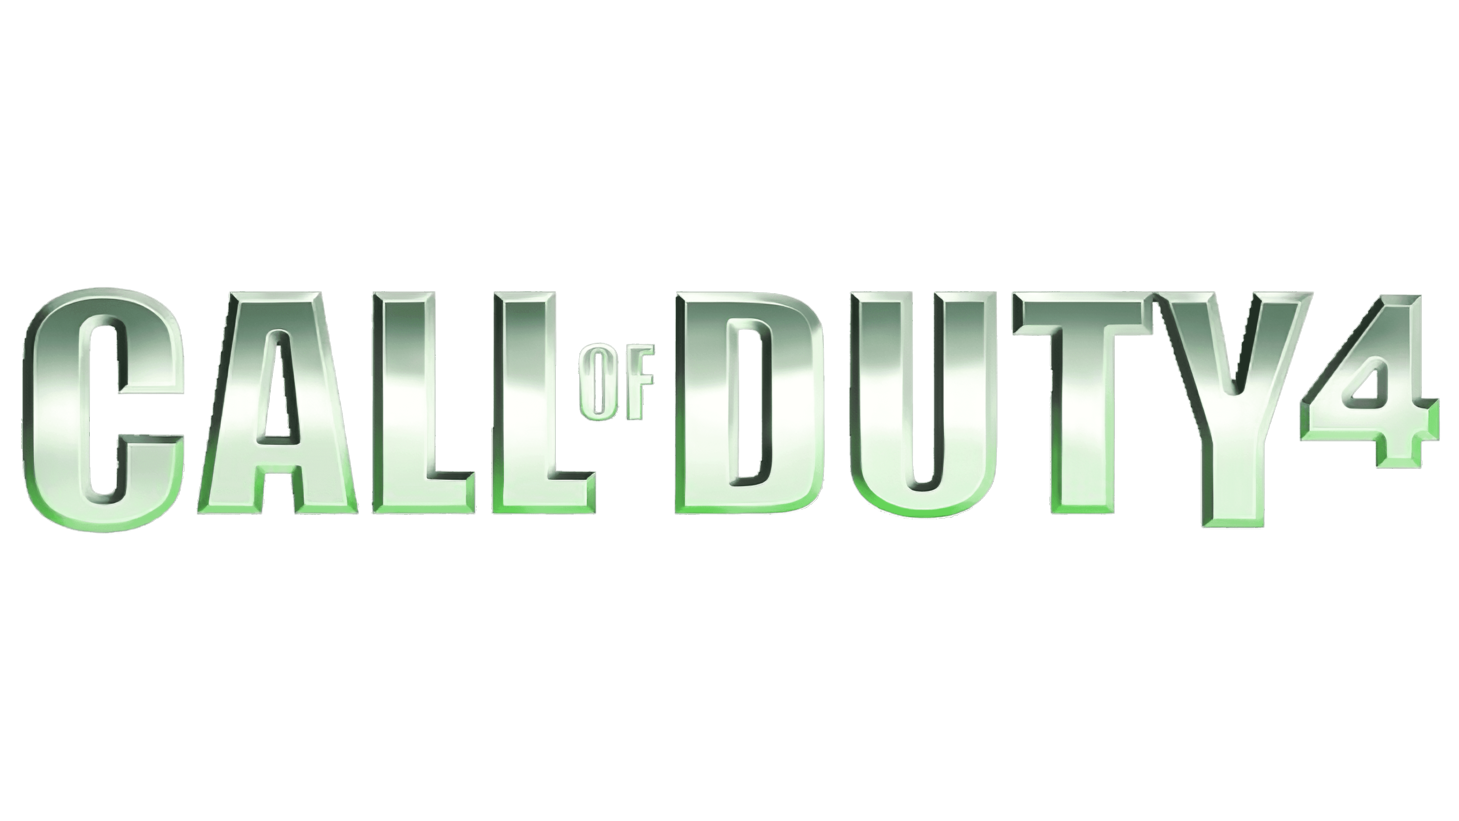 Call of duty sign 2007 2008